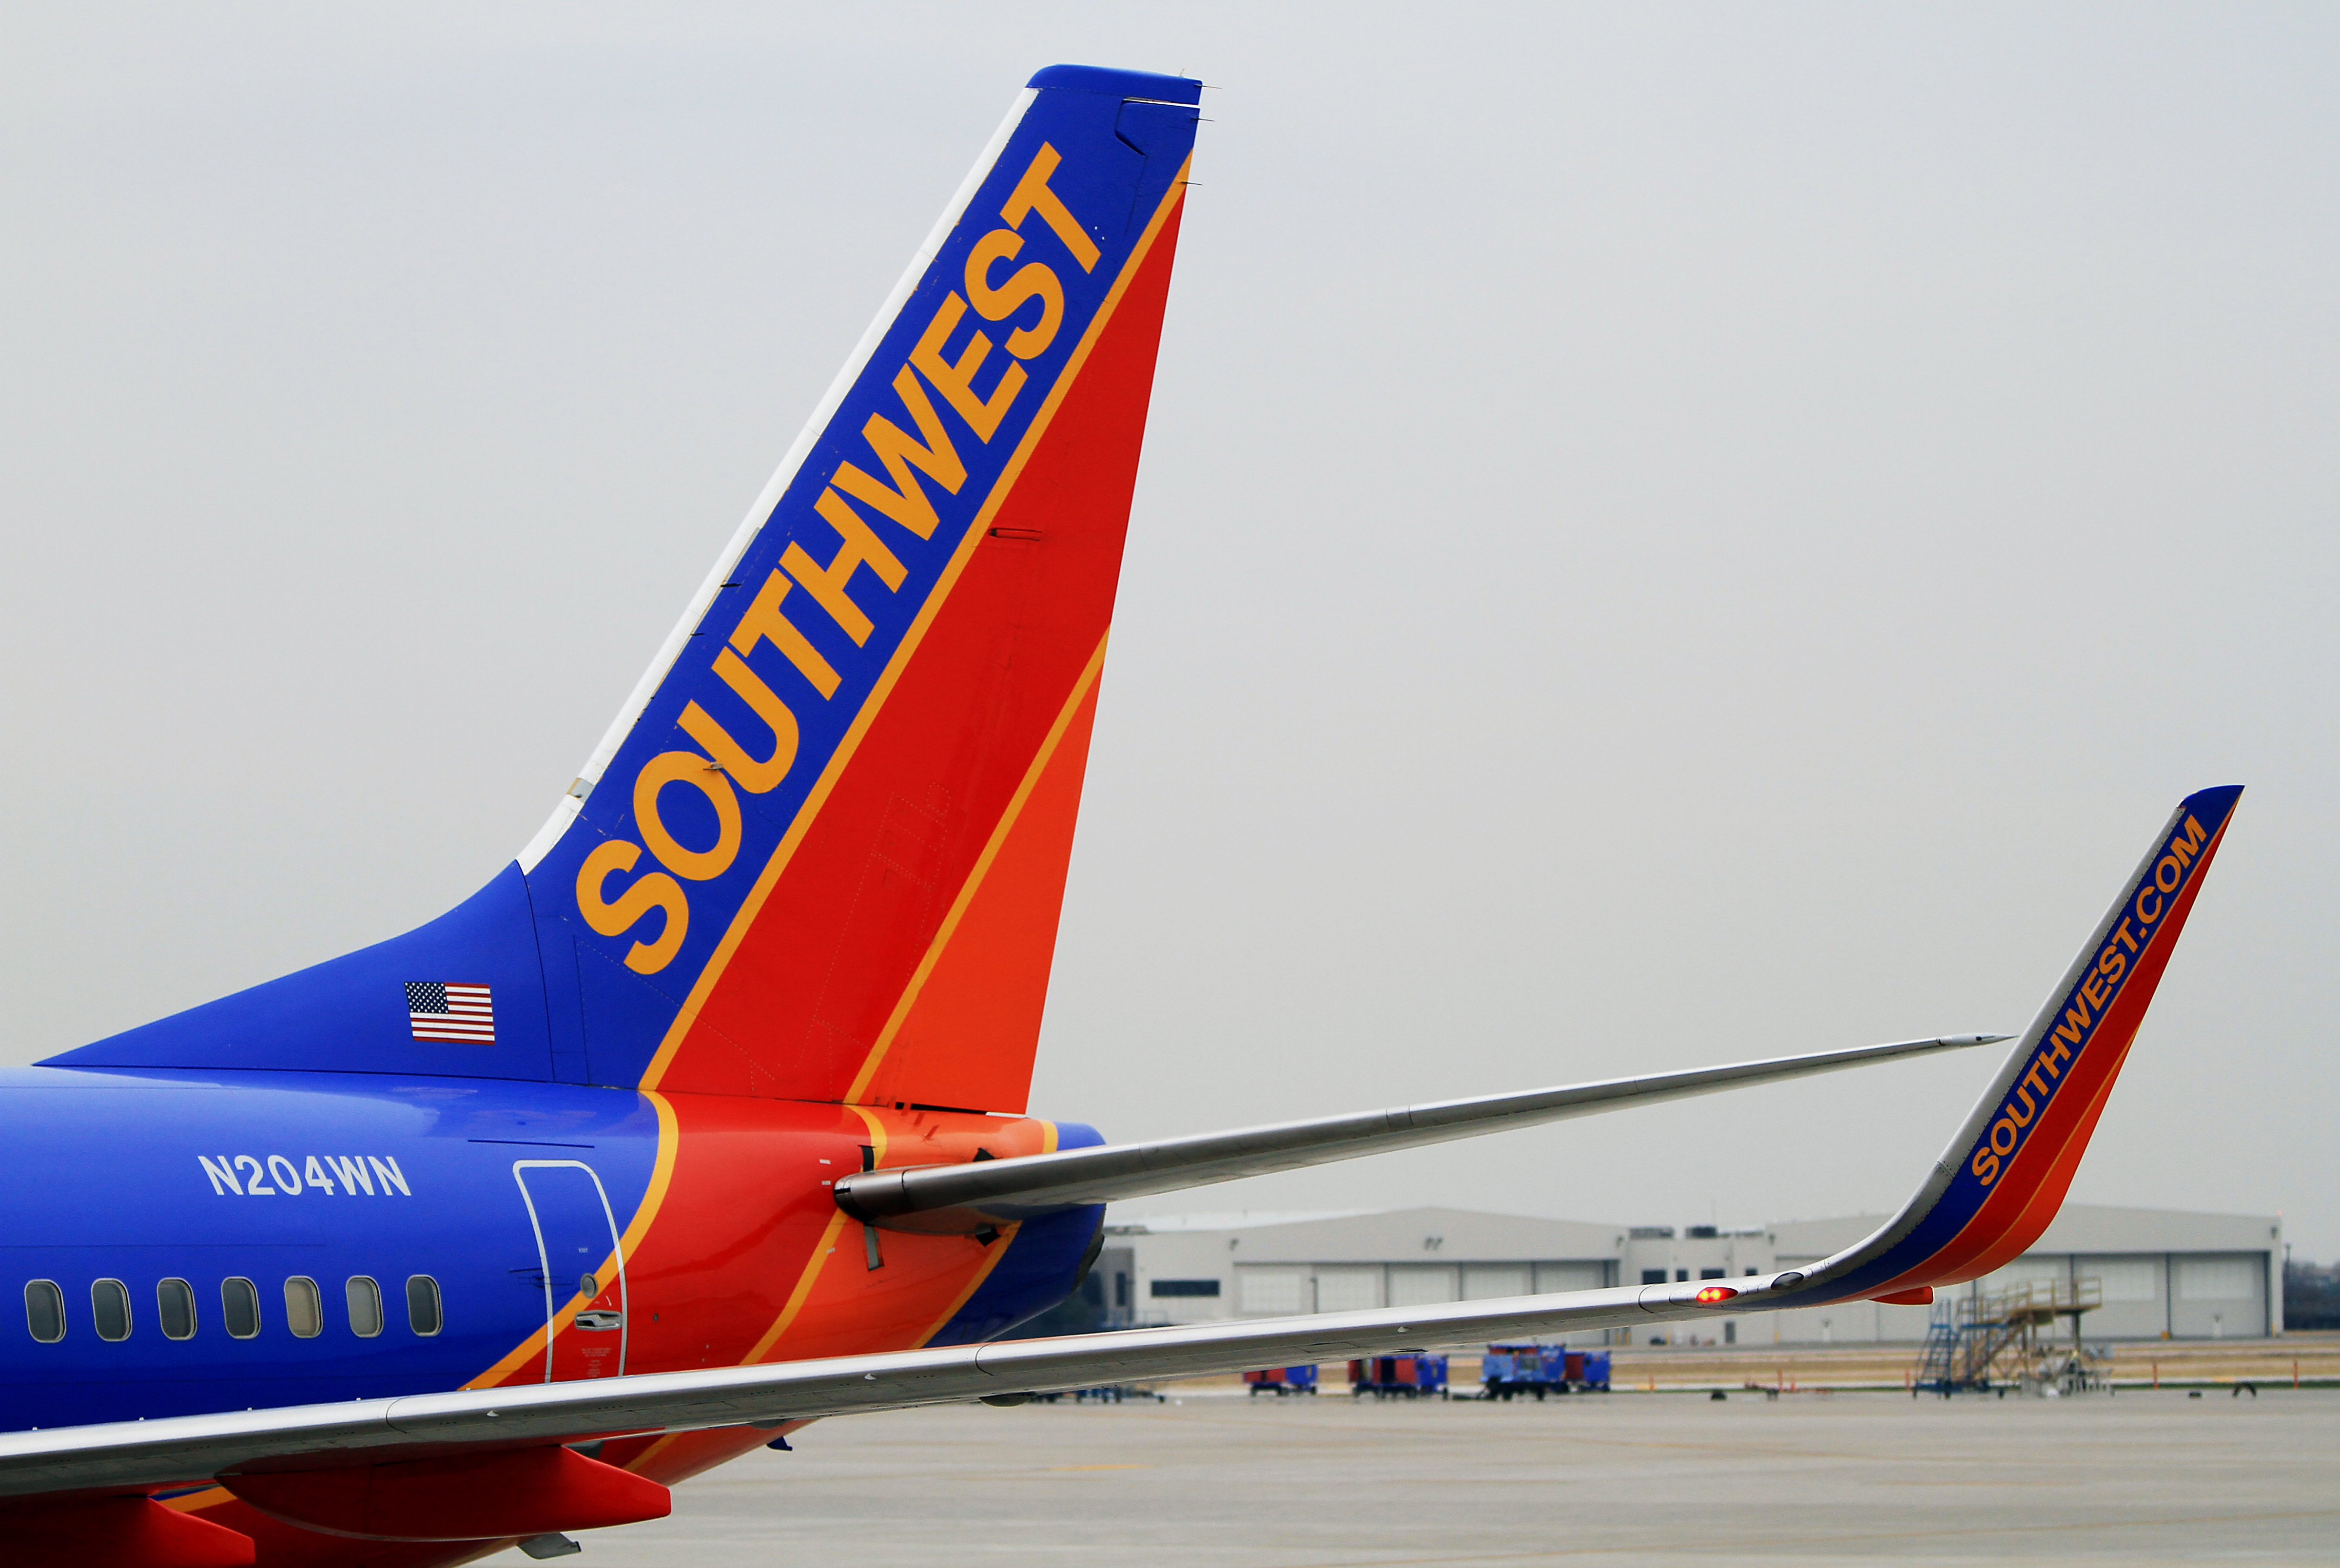 A Southwest Airlines plane sits at a gate at Dallas Love Field Airport on Feb. 3, 2014 (Ben Torres—Bloomberg via Getty Images)